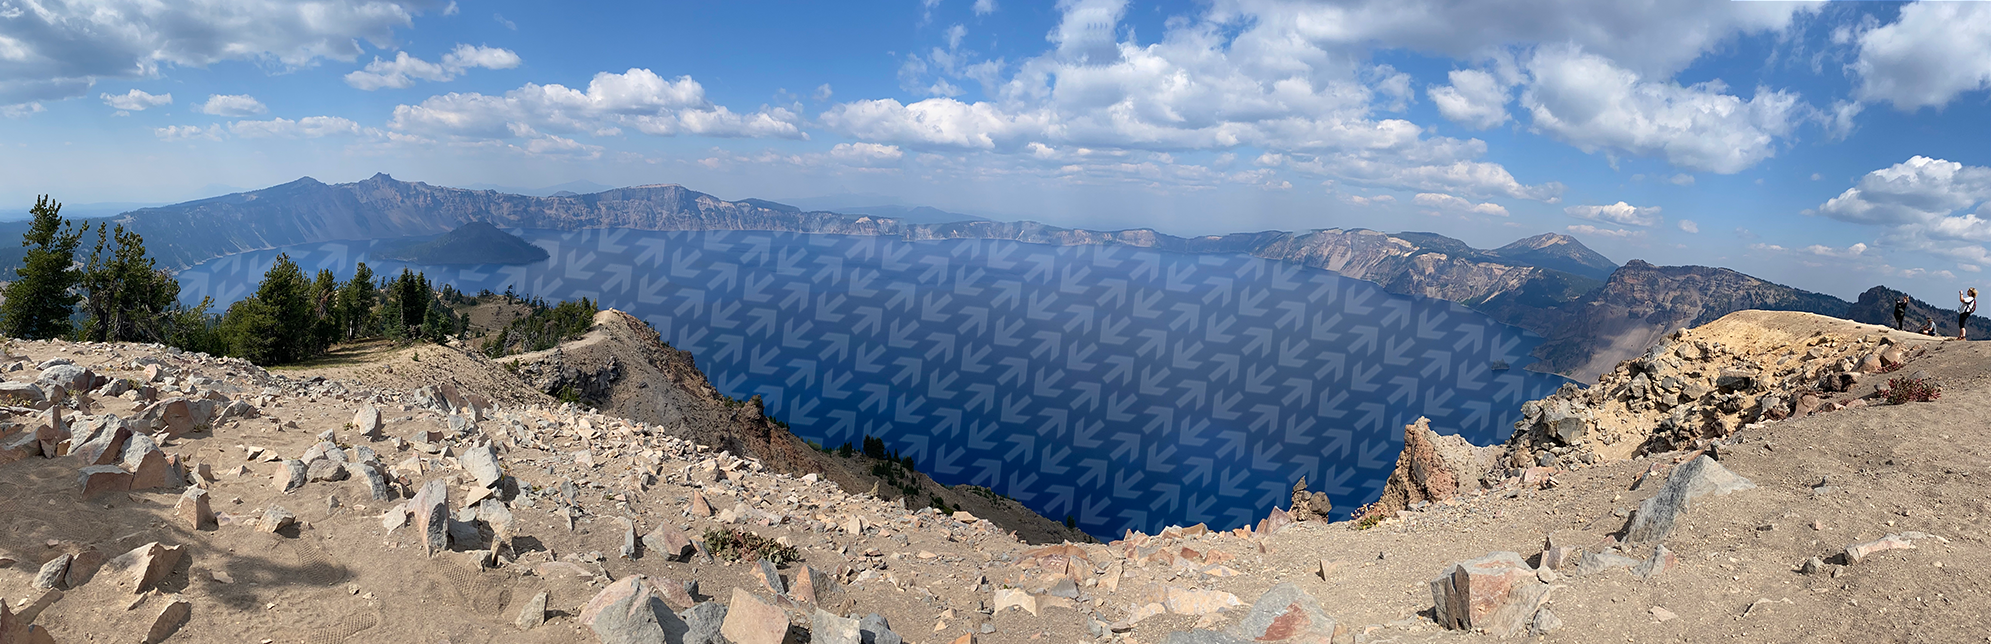 landscape panoramic photo of crater lake national park